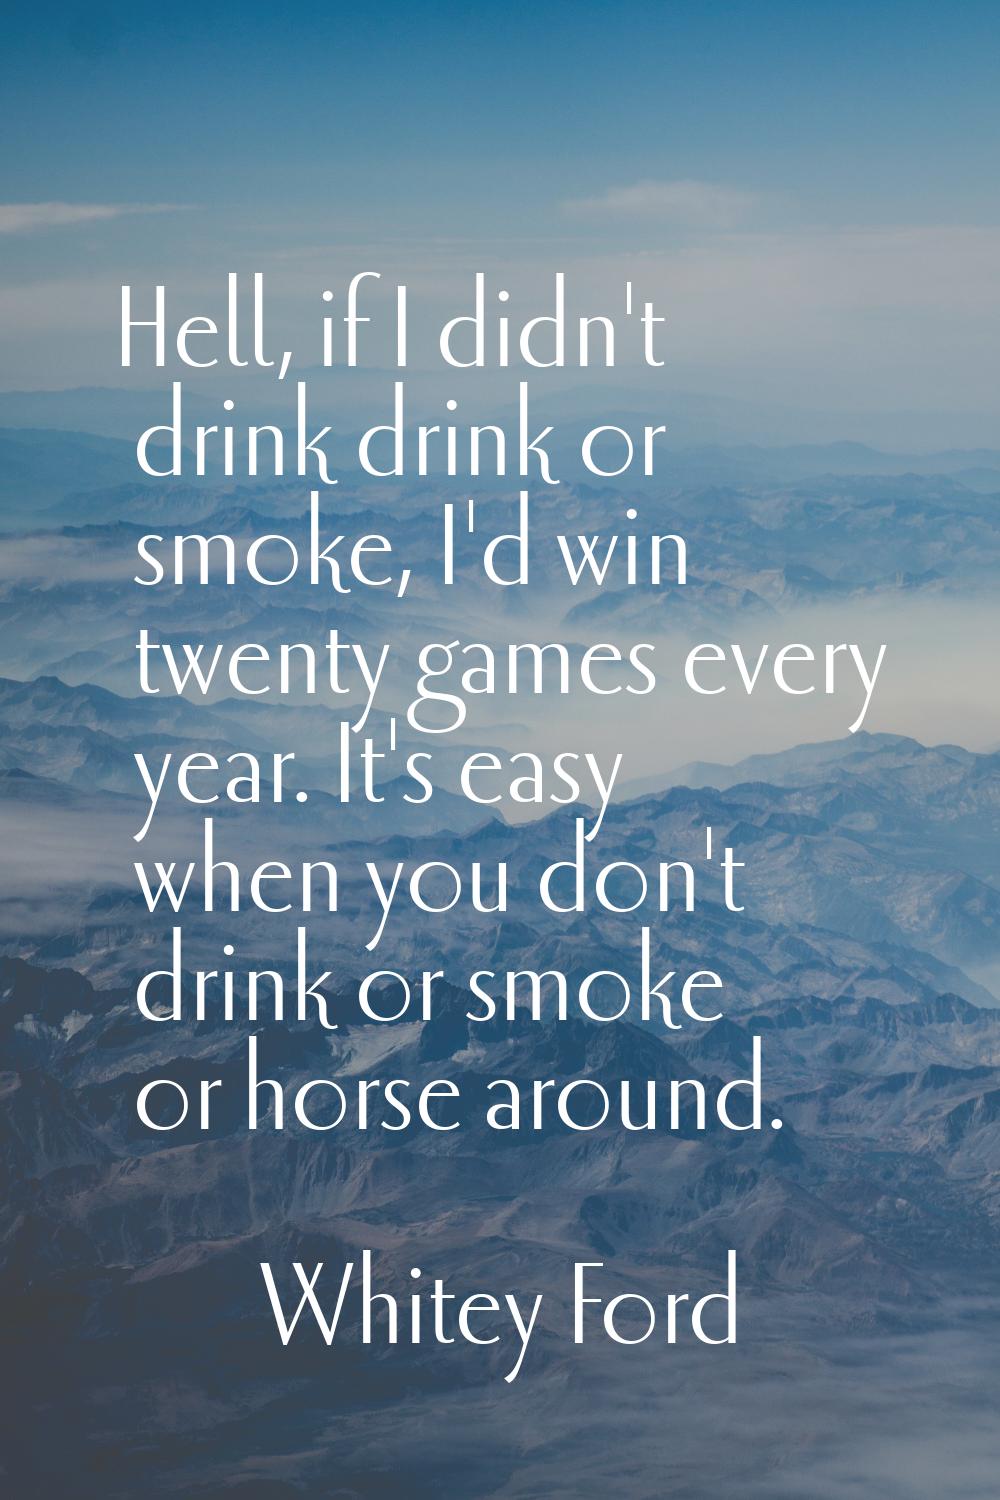 Hell, if I didn't drink drink or smoke, I'd win twenty games every year. It's easy when you don't d